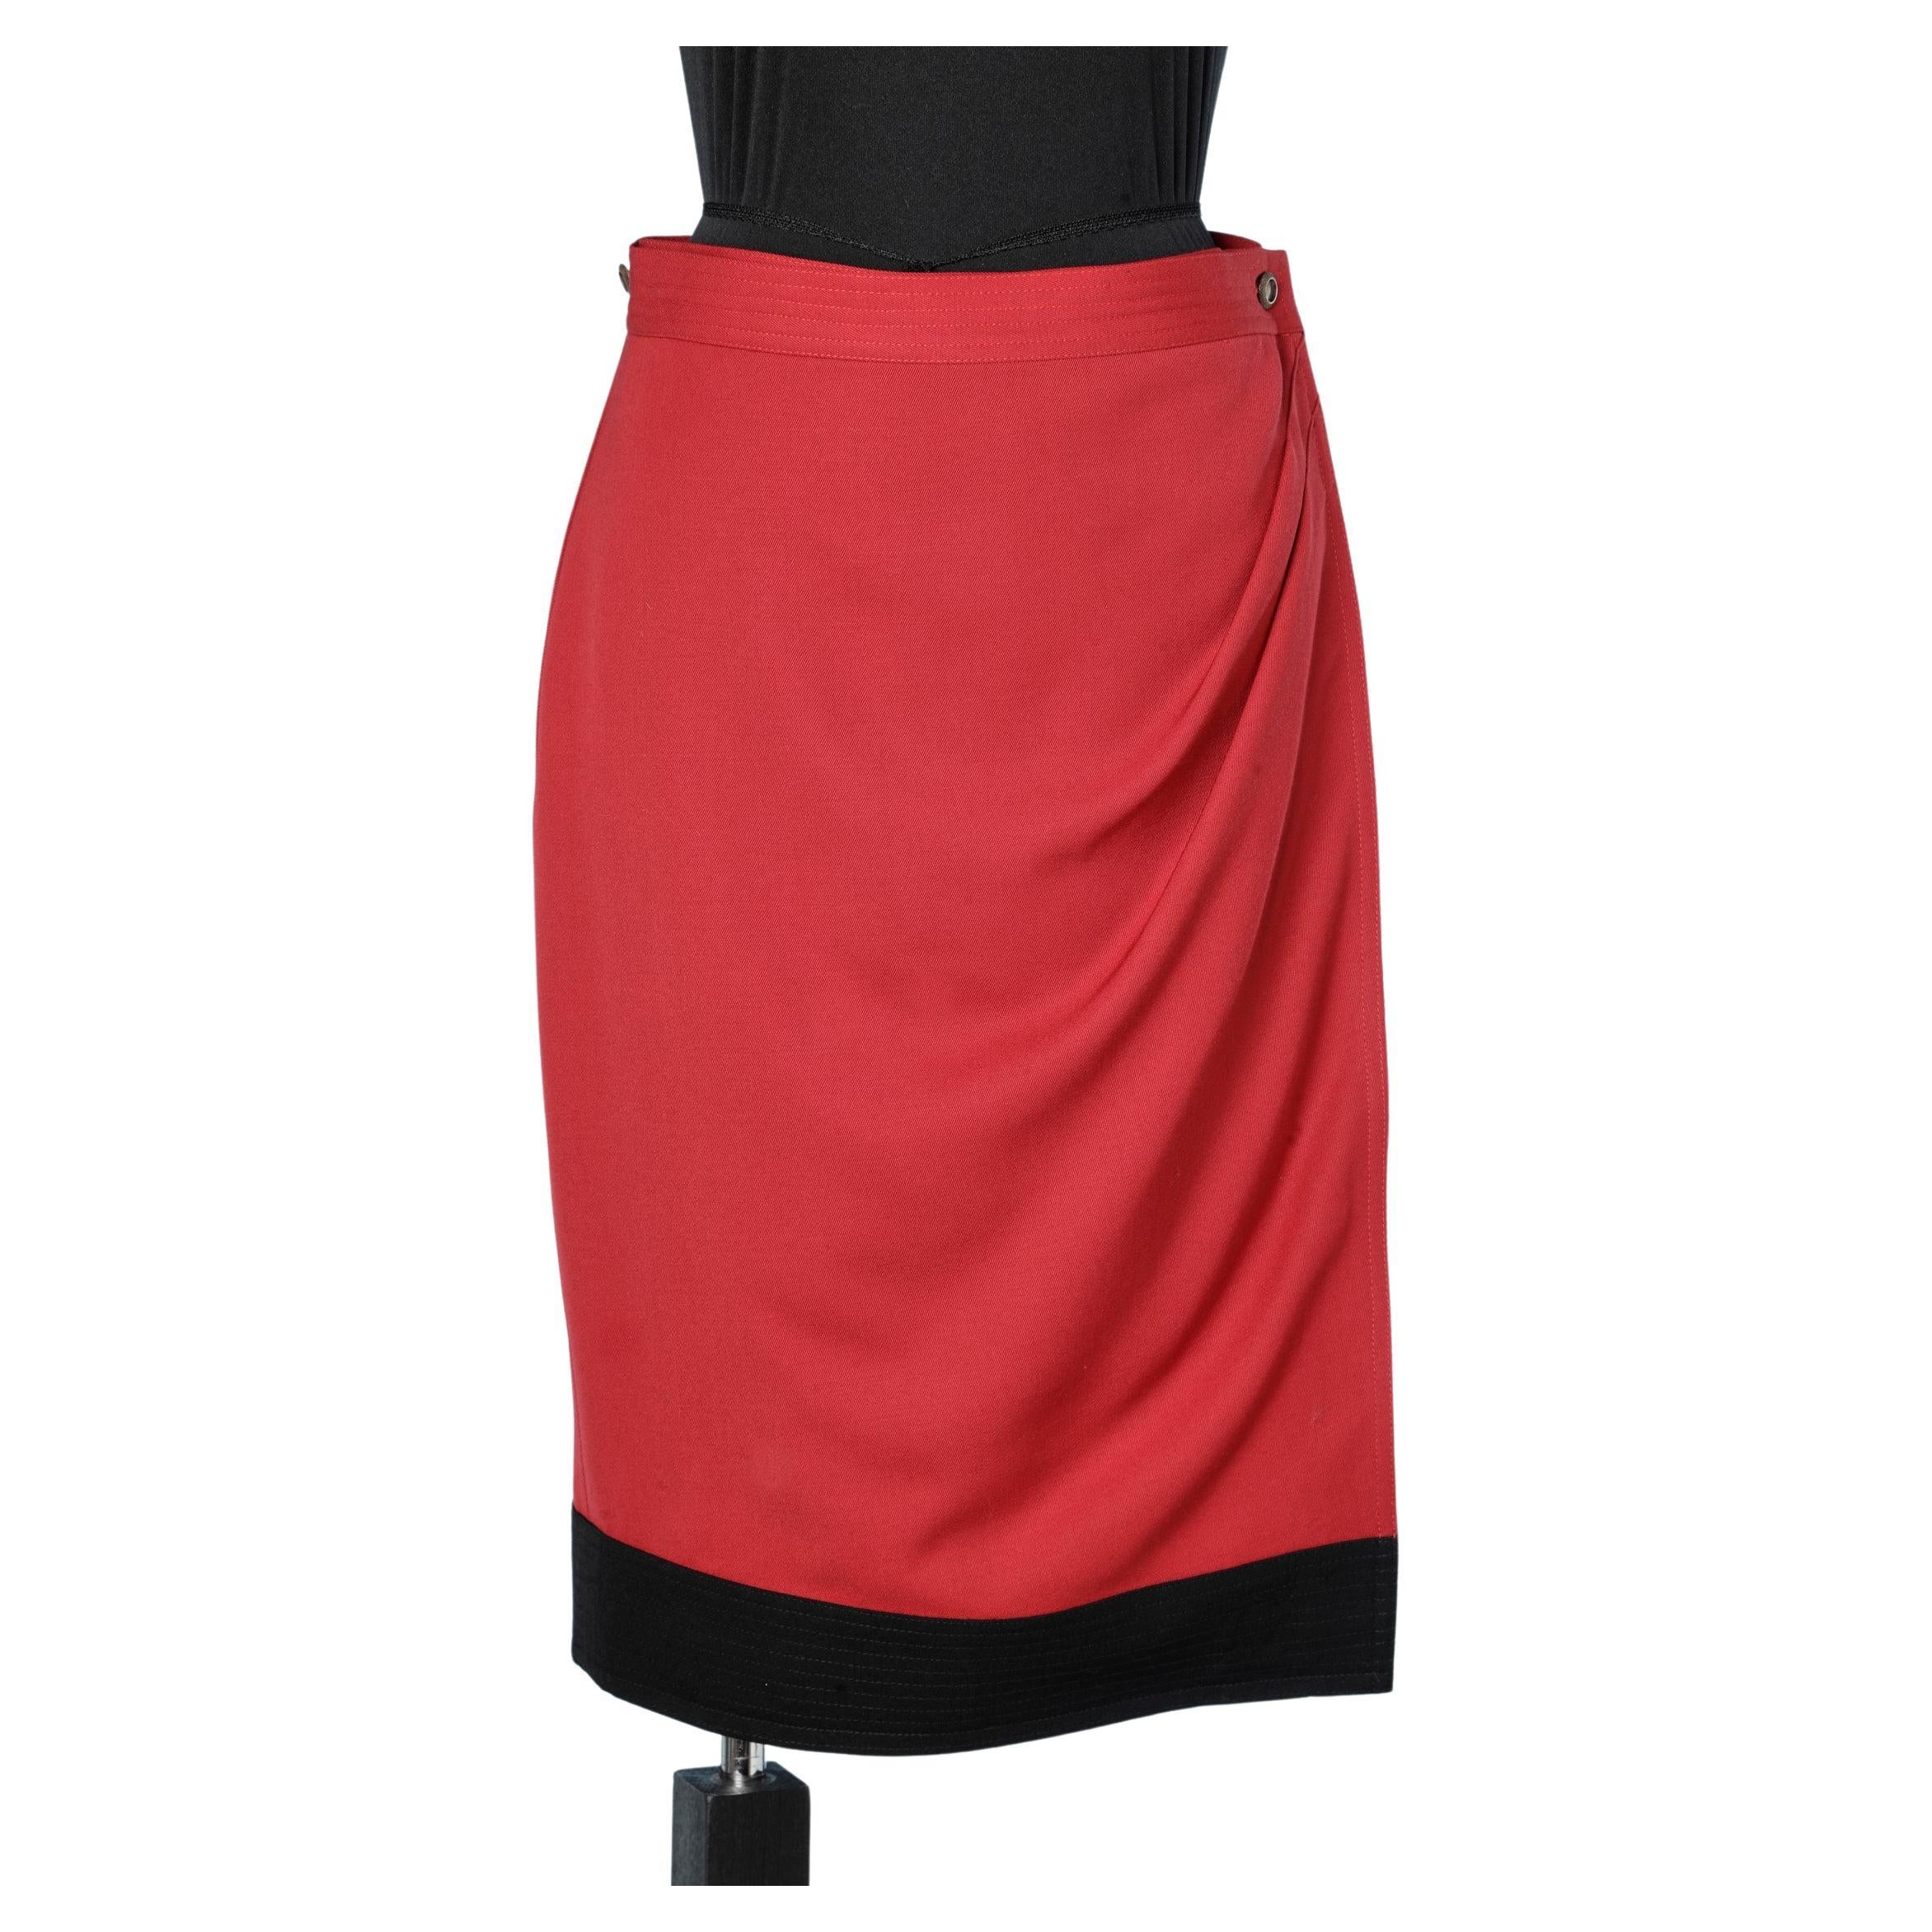 Wrap skirt in red wool and black strip in the bottom edge Gianni Versace  For Sale